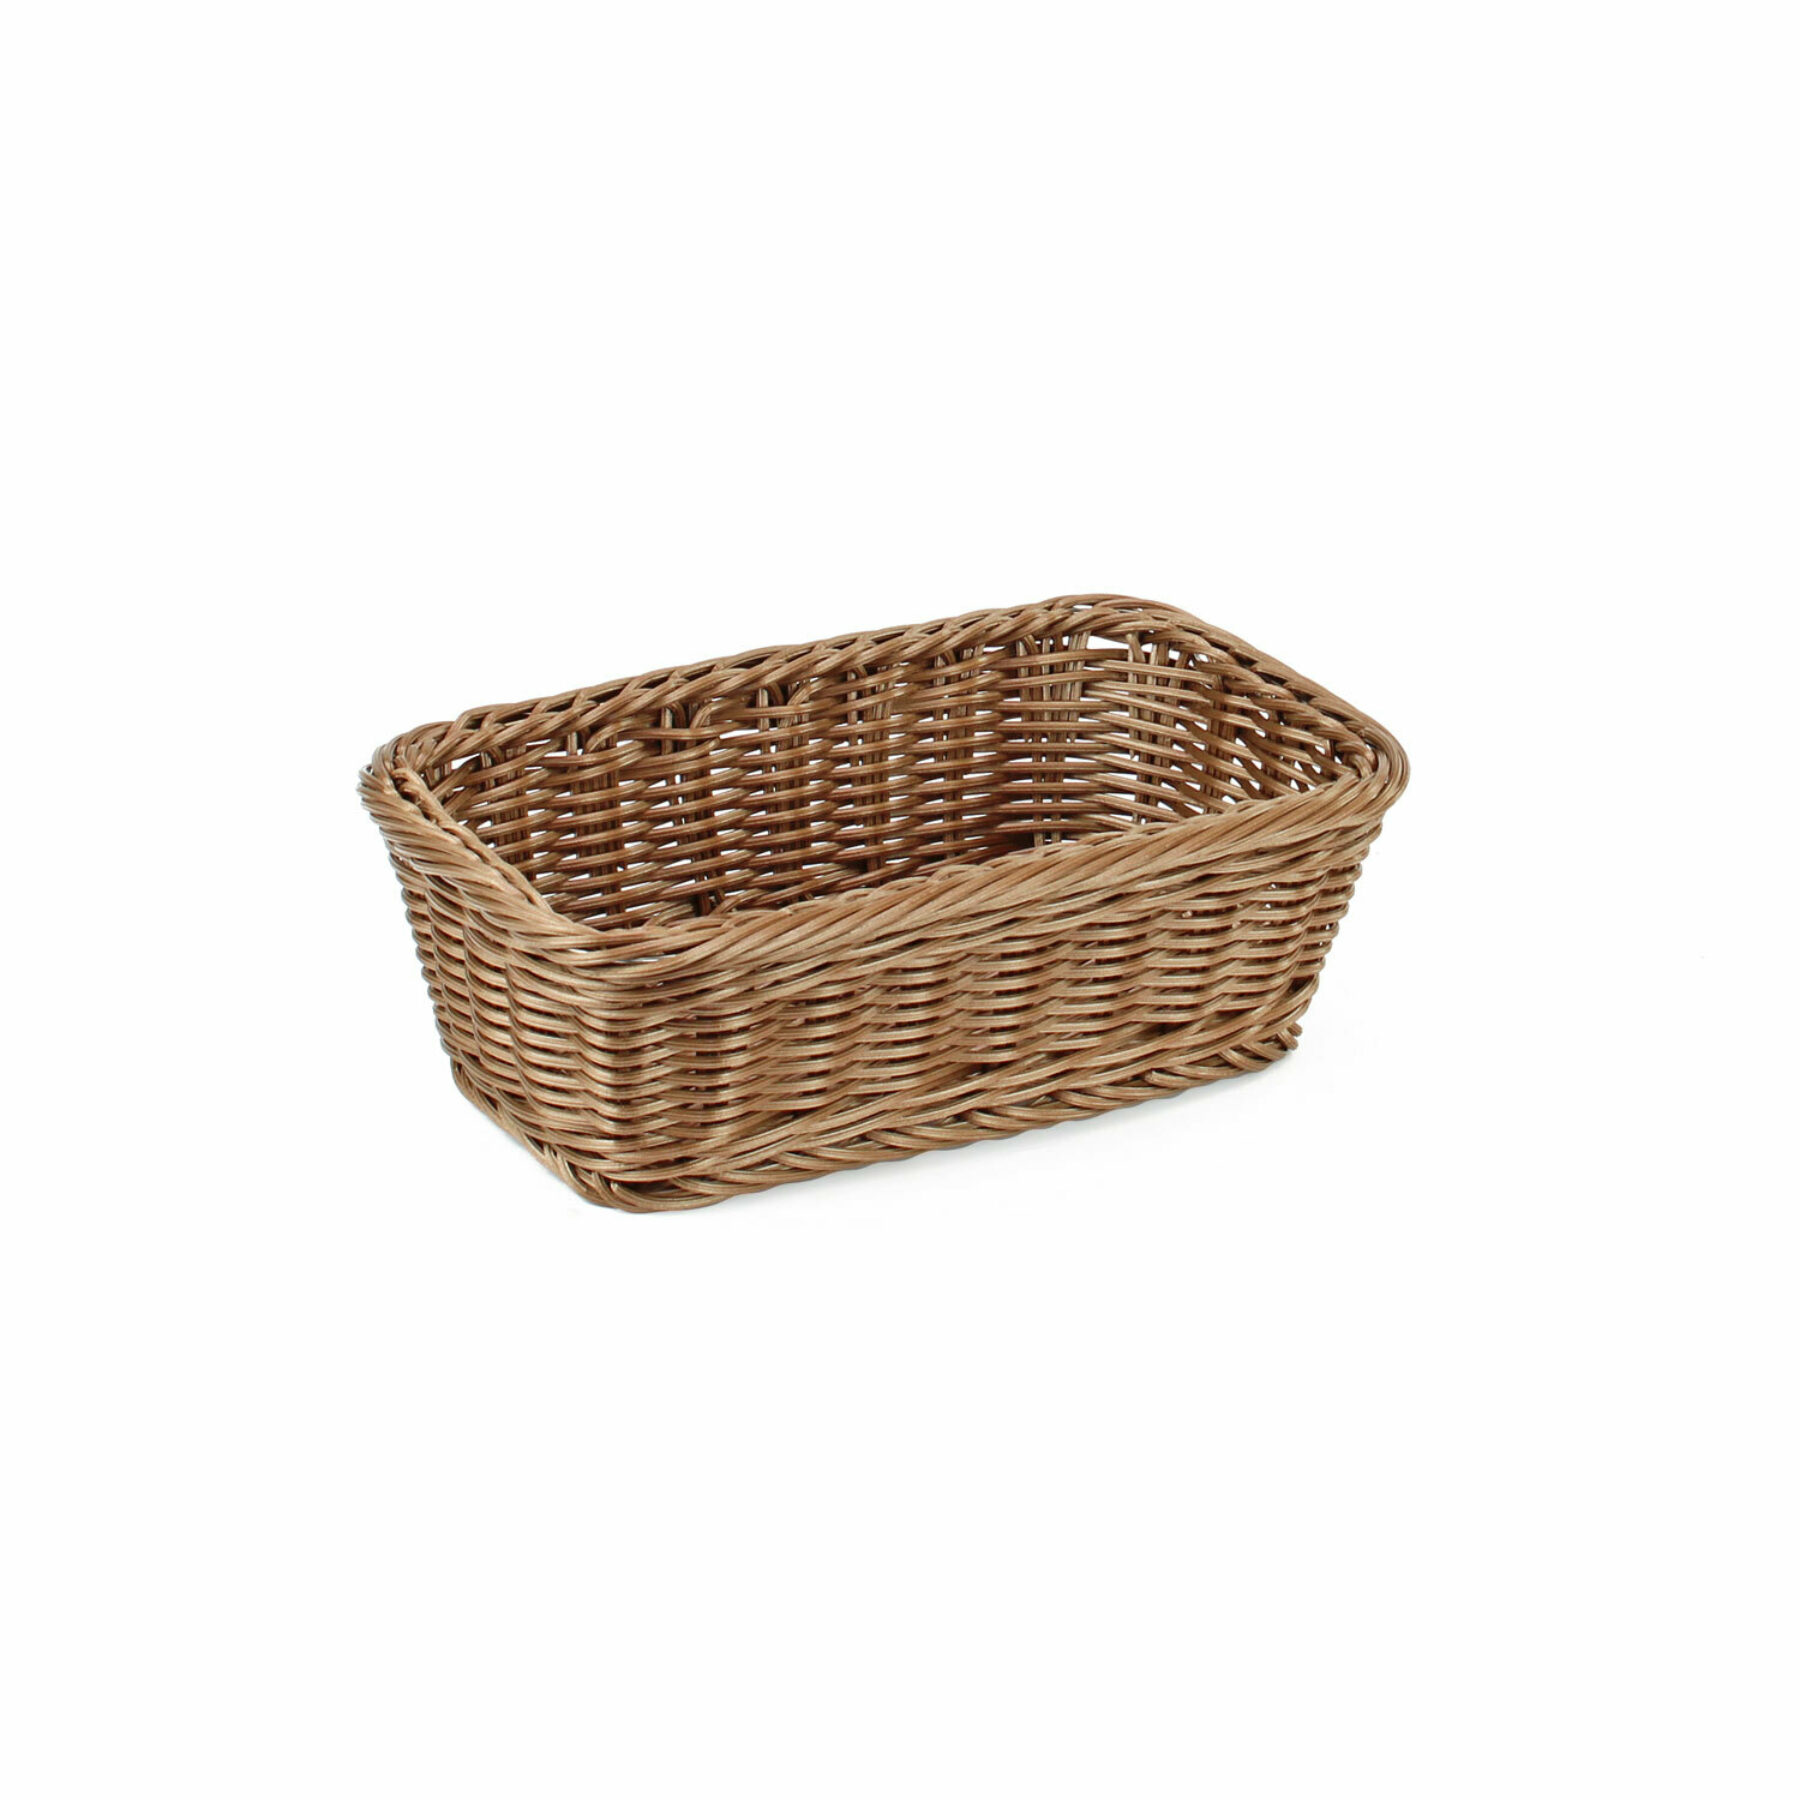 1/4 GN Taupe Polywicker Basket